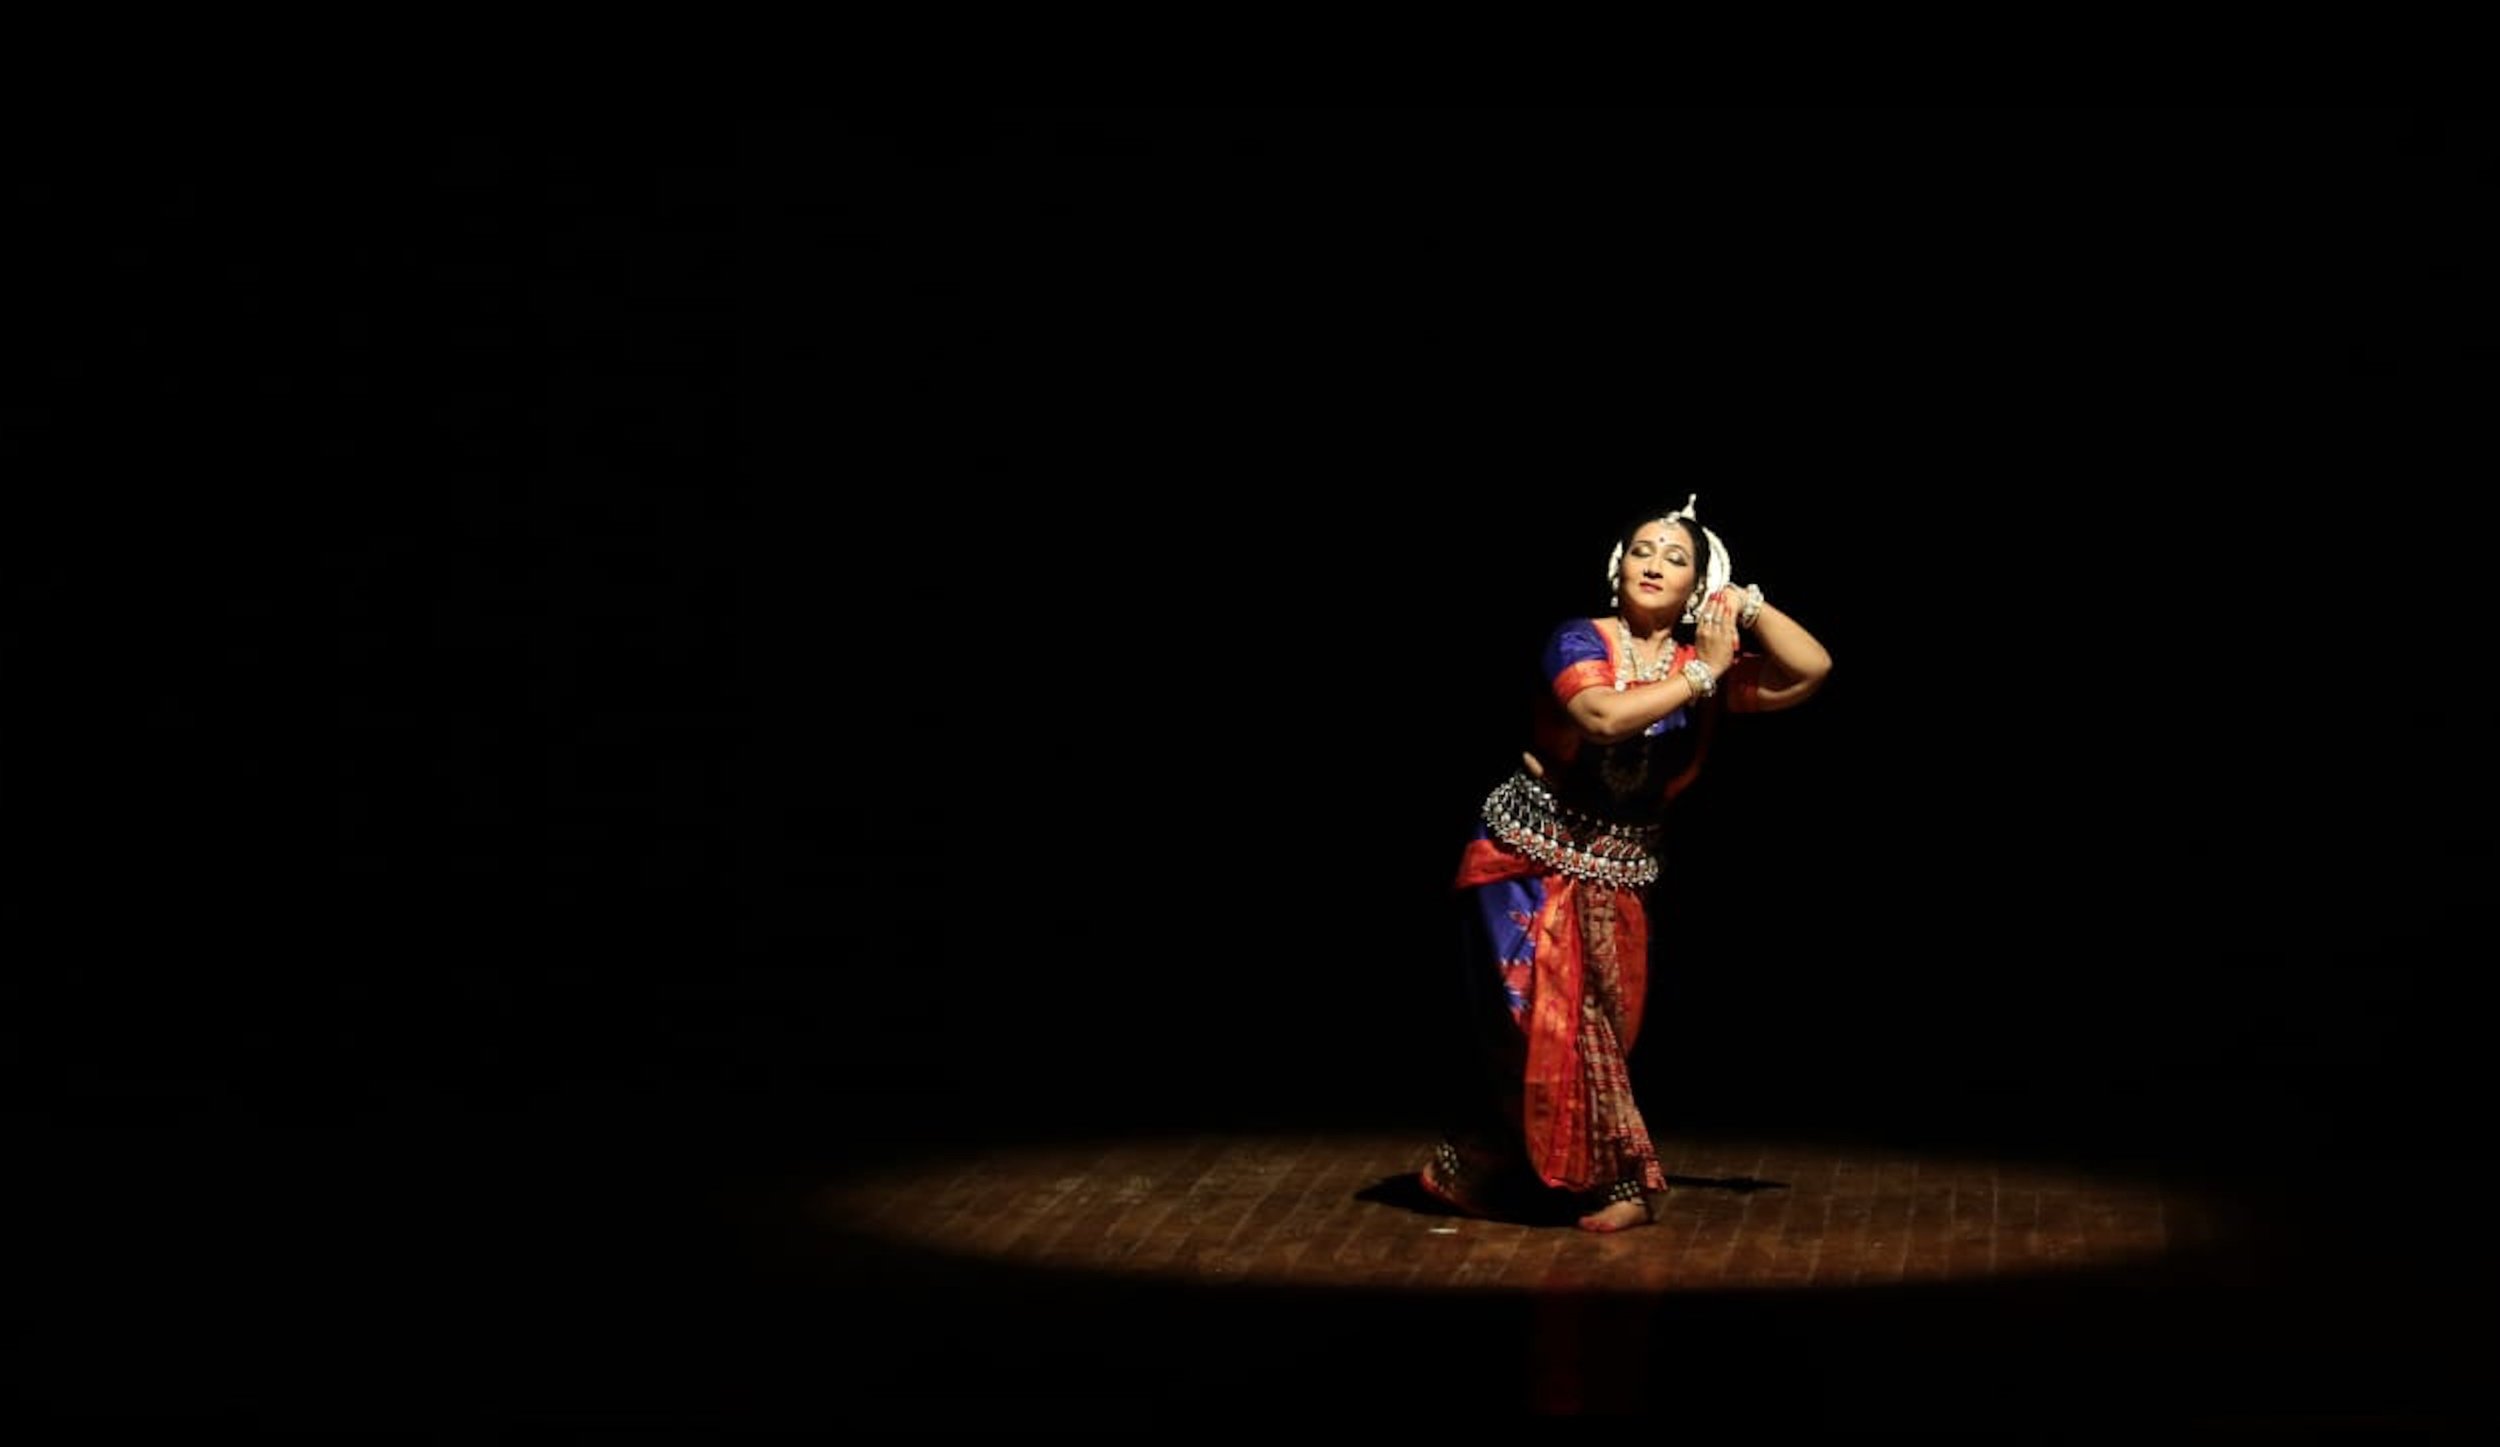 Umeed - a dance initiative dedicated to all artist in this challenging times